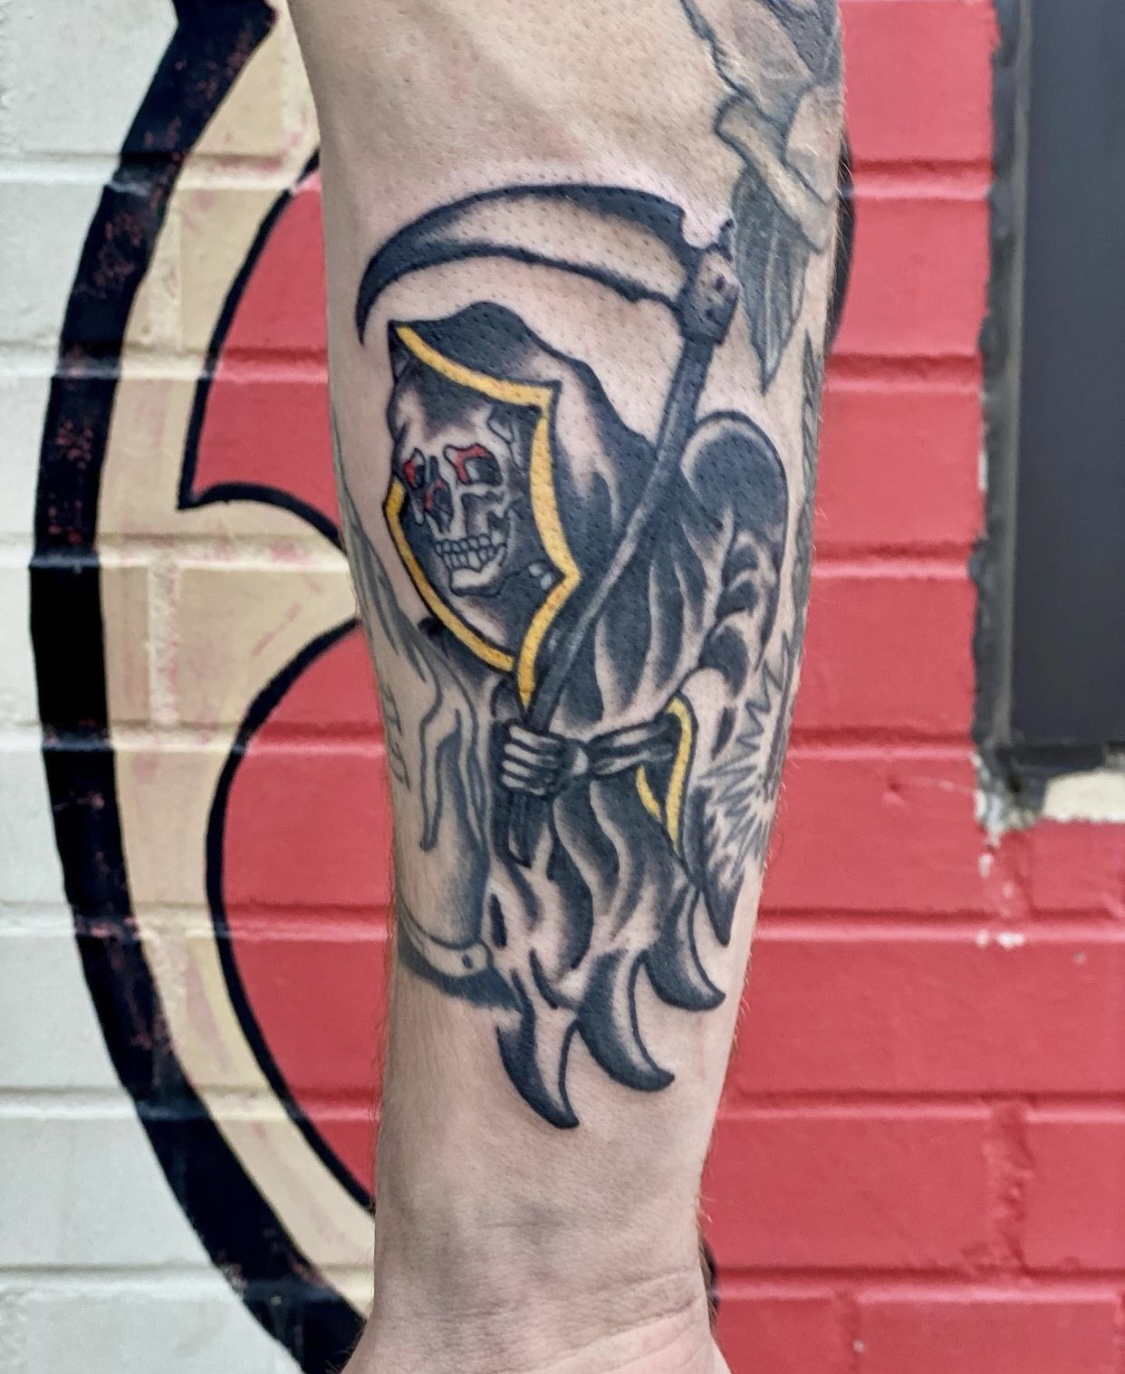 Grim reaper tattoo on a mans arm from top Dallas tattoo shop